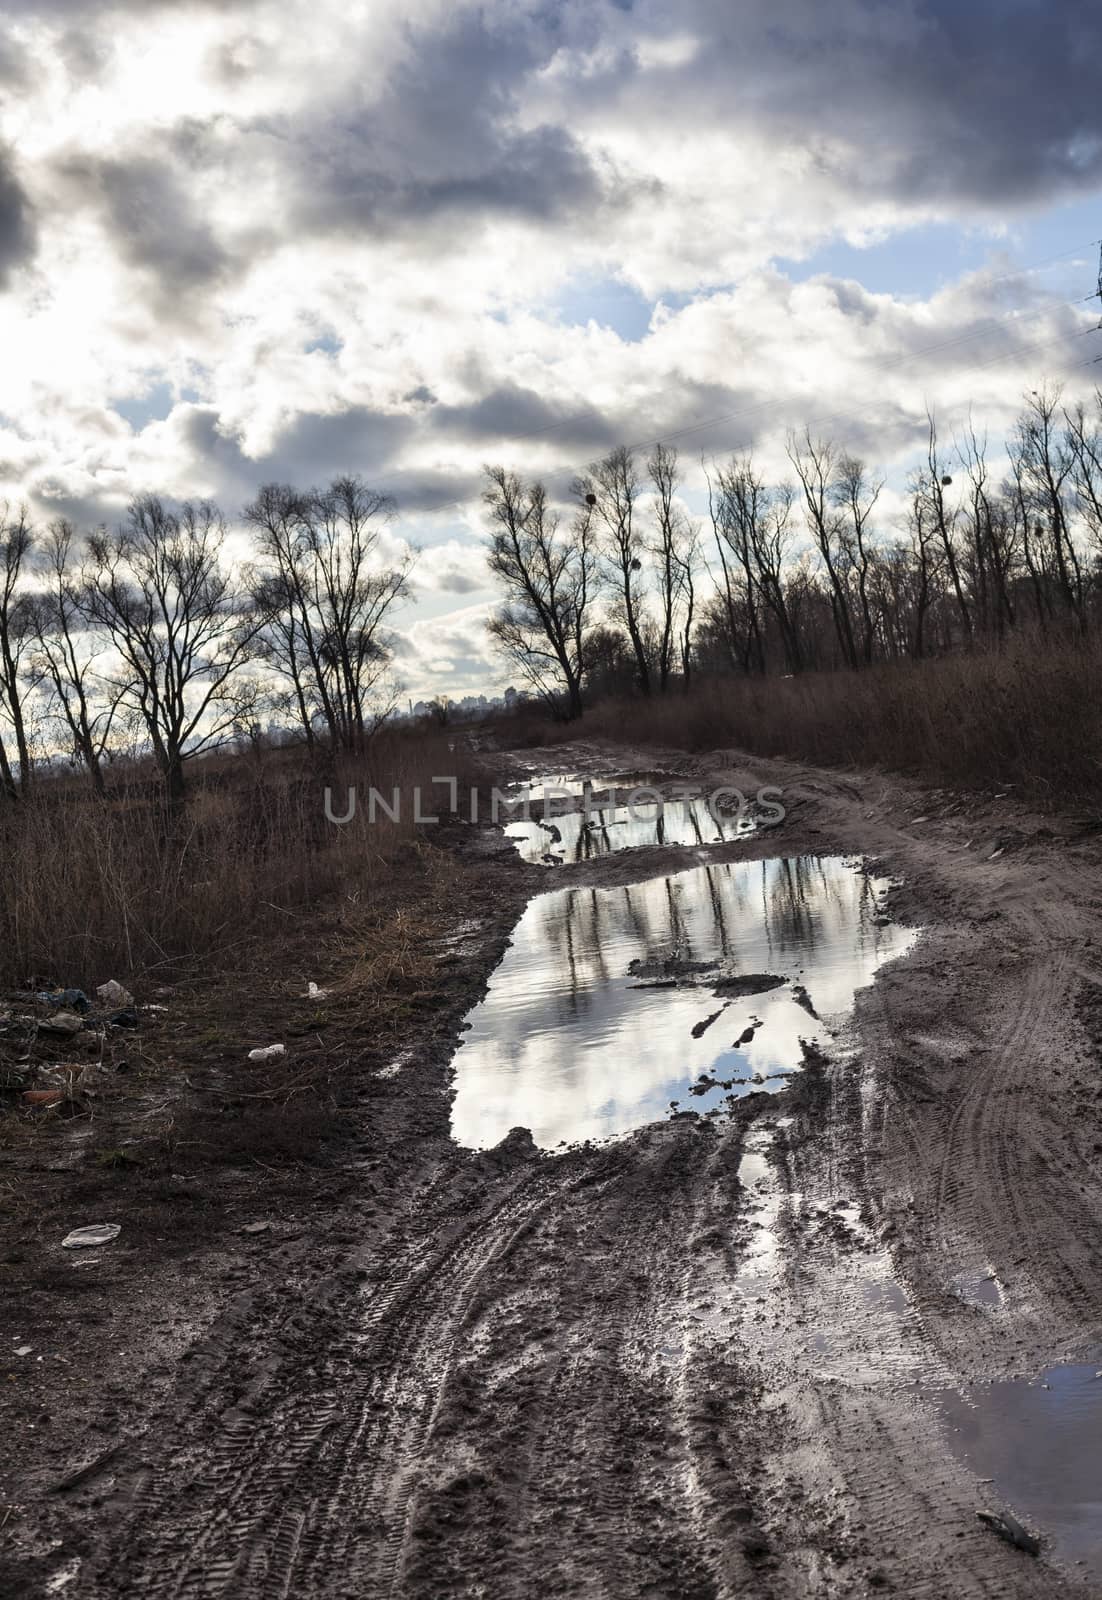 Mud and puddles on the dirt road by rootstocks